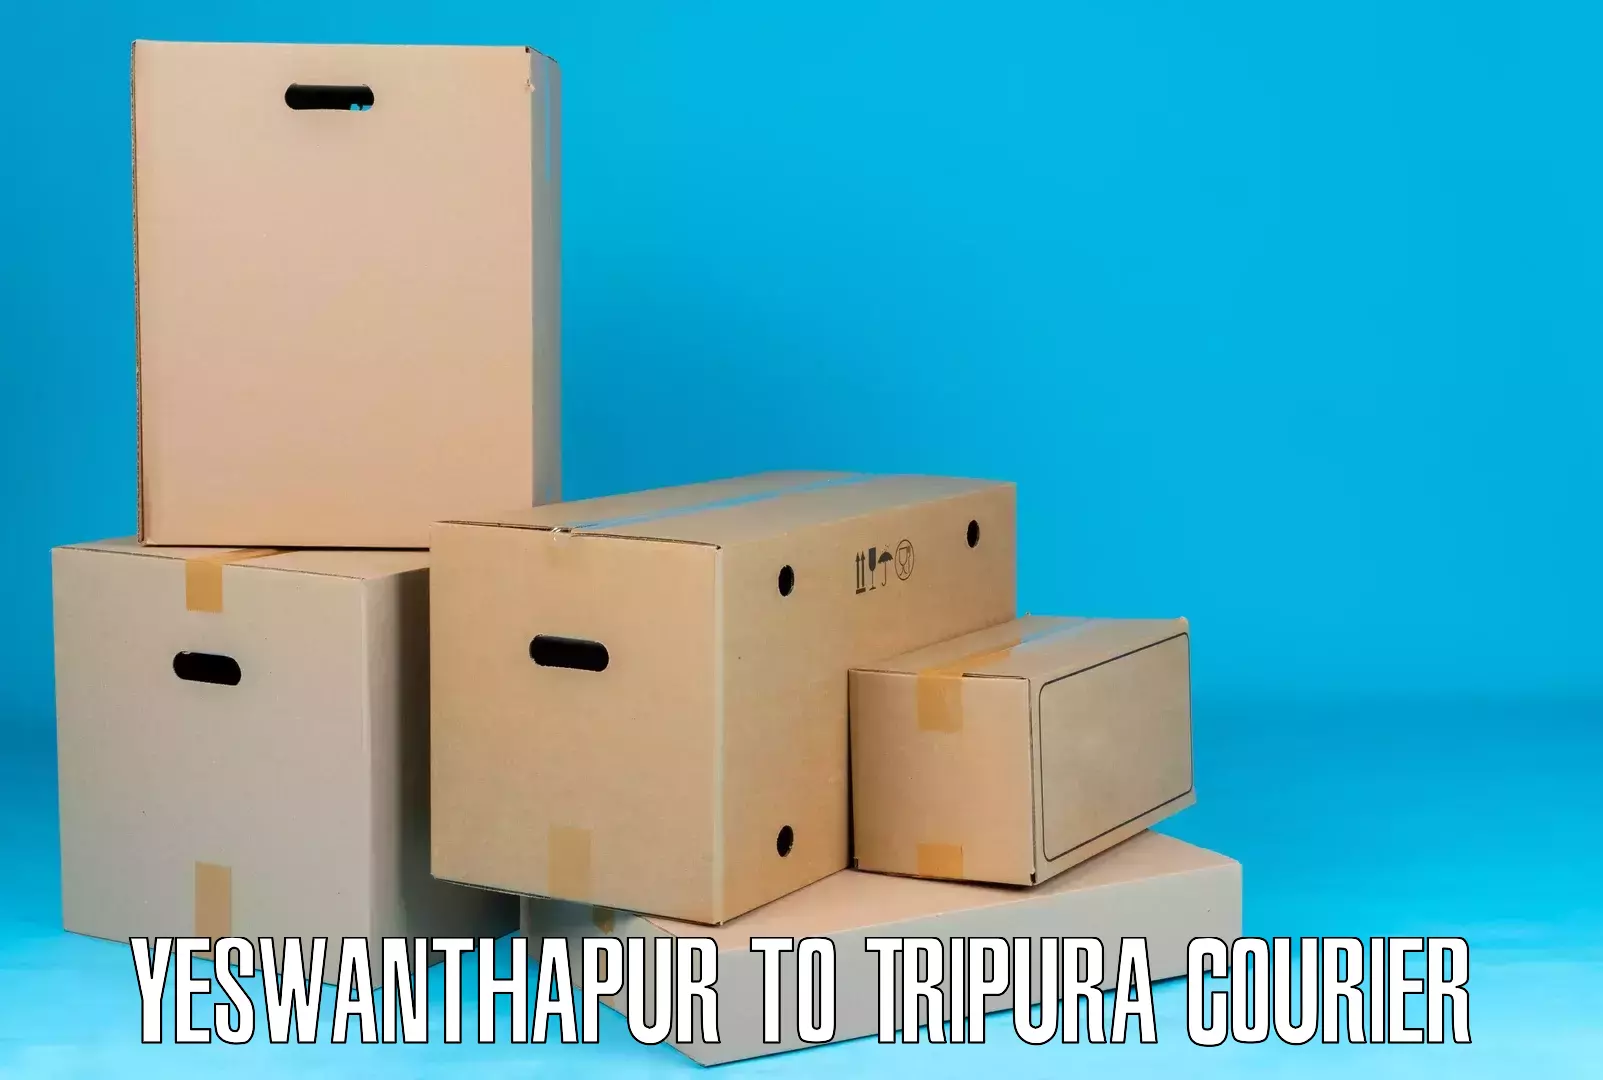 Efficient freight service Yeswanthapur to Tripura